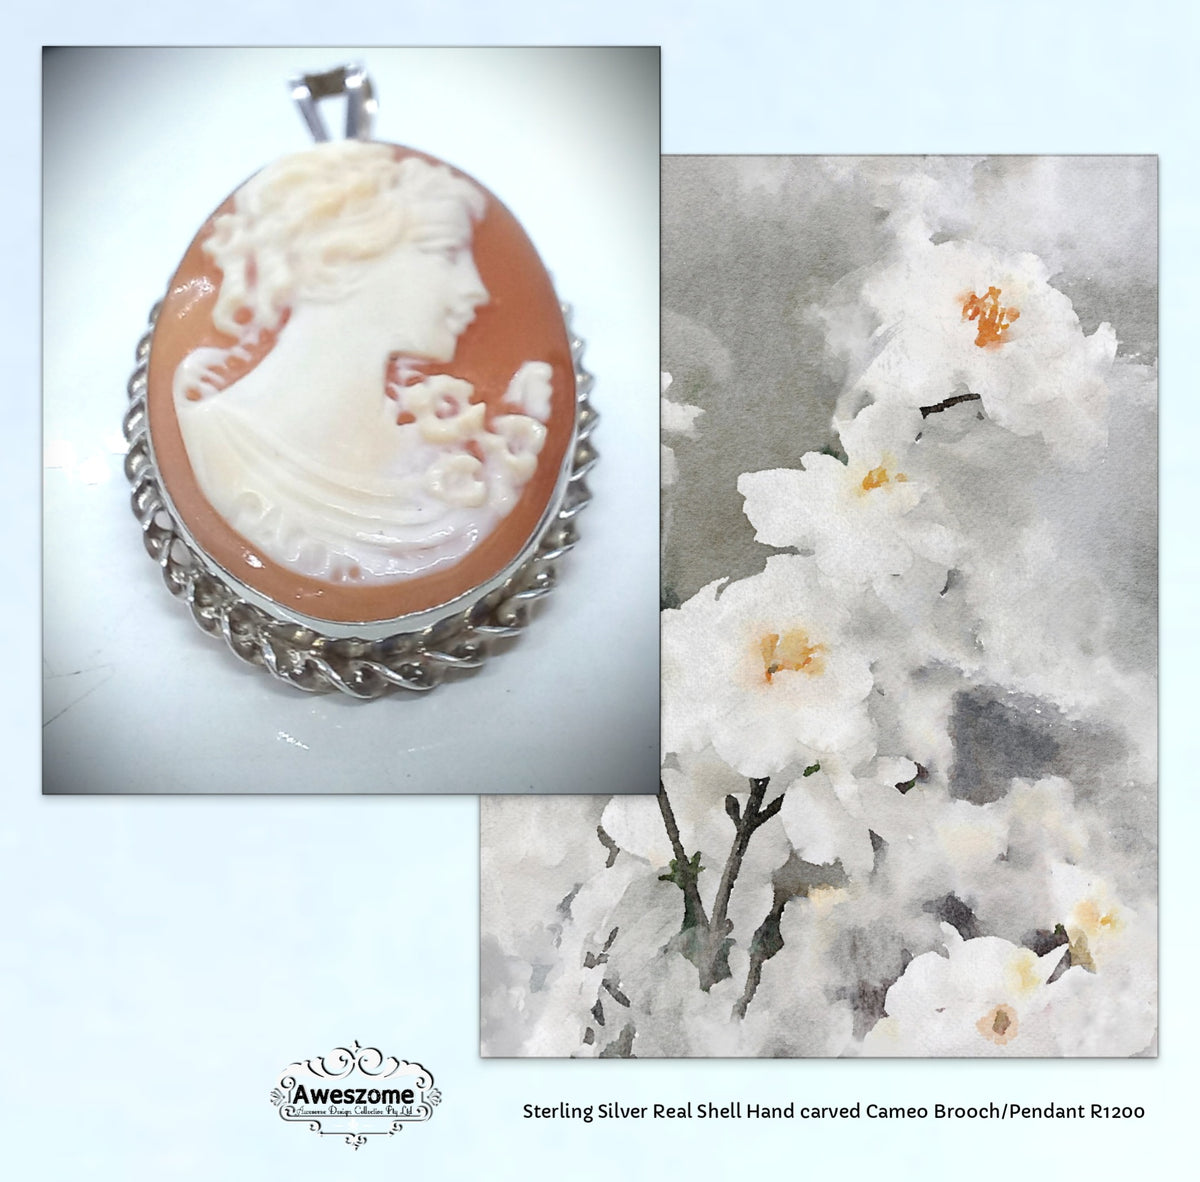 Sterling Silver Pendant Cameo Brooch